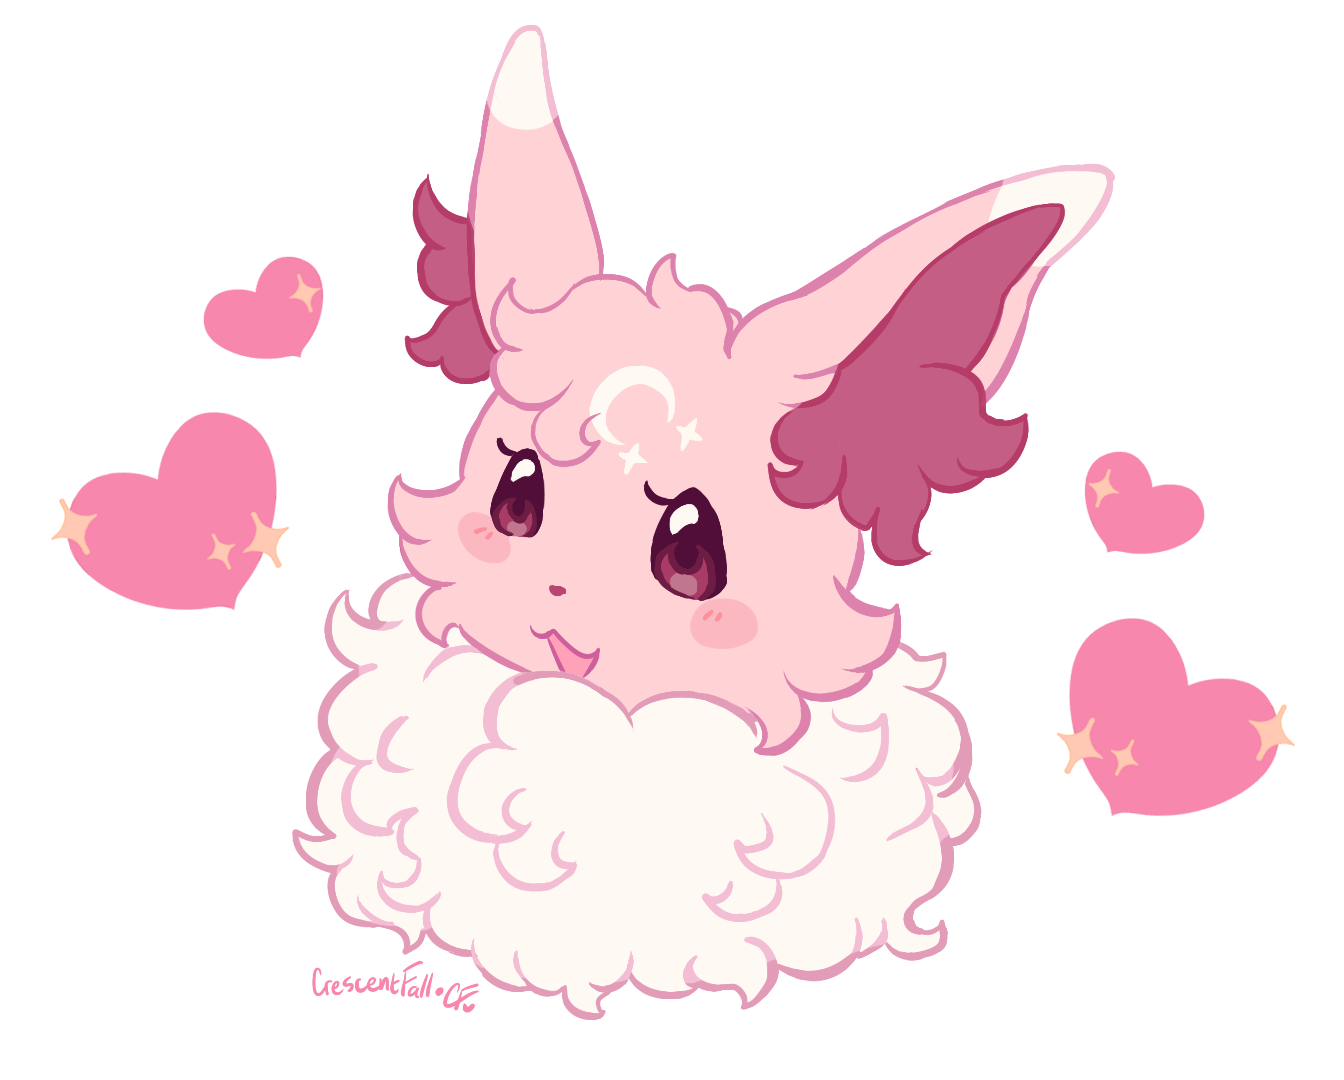 An eevee with big, fluffy pink fur and a moon marking on her head